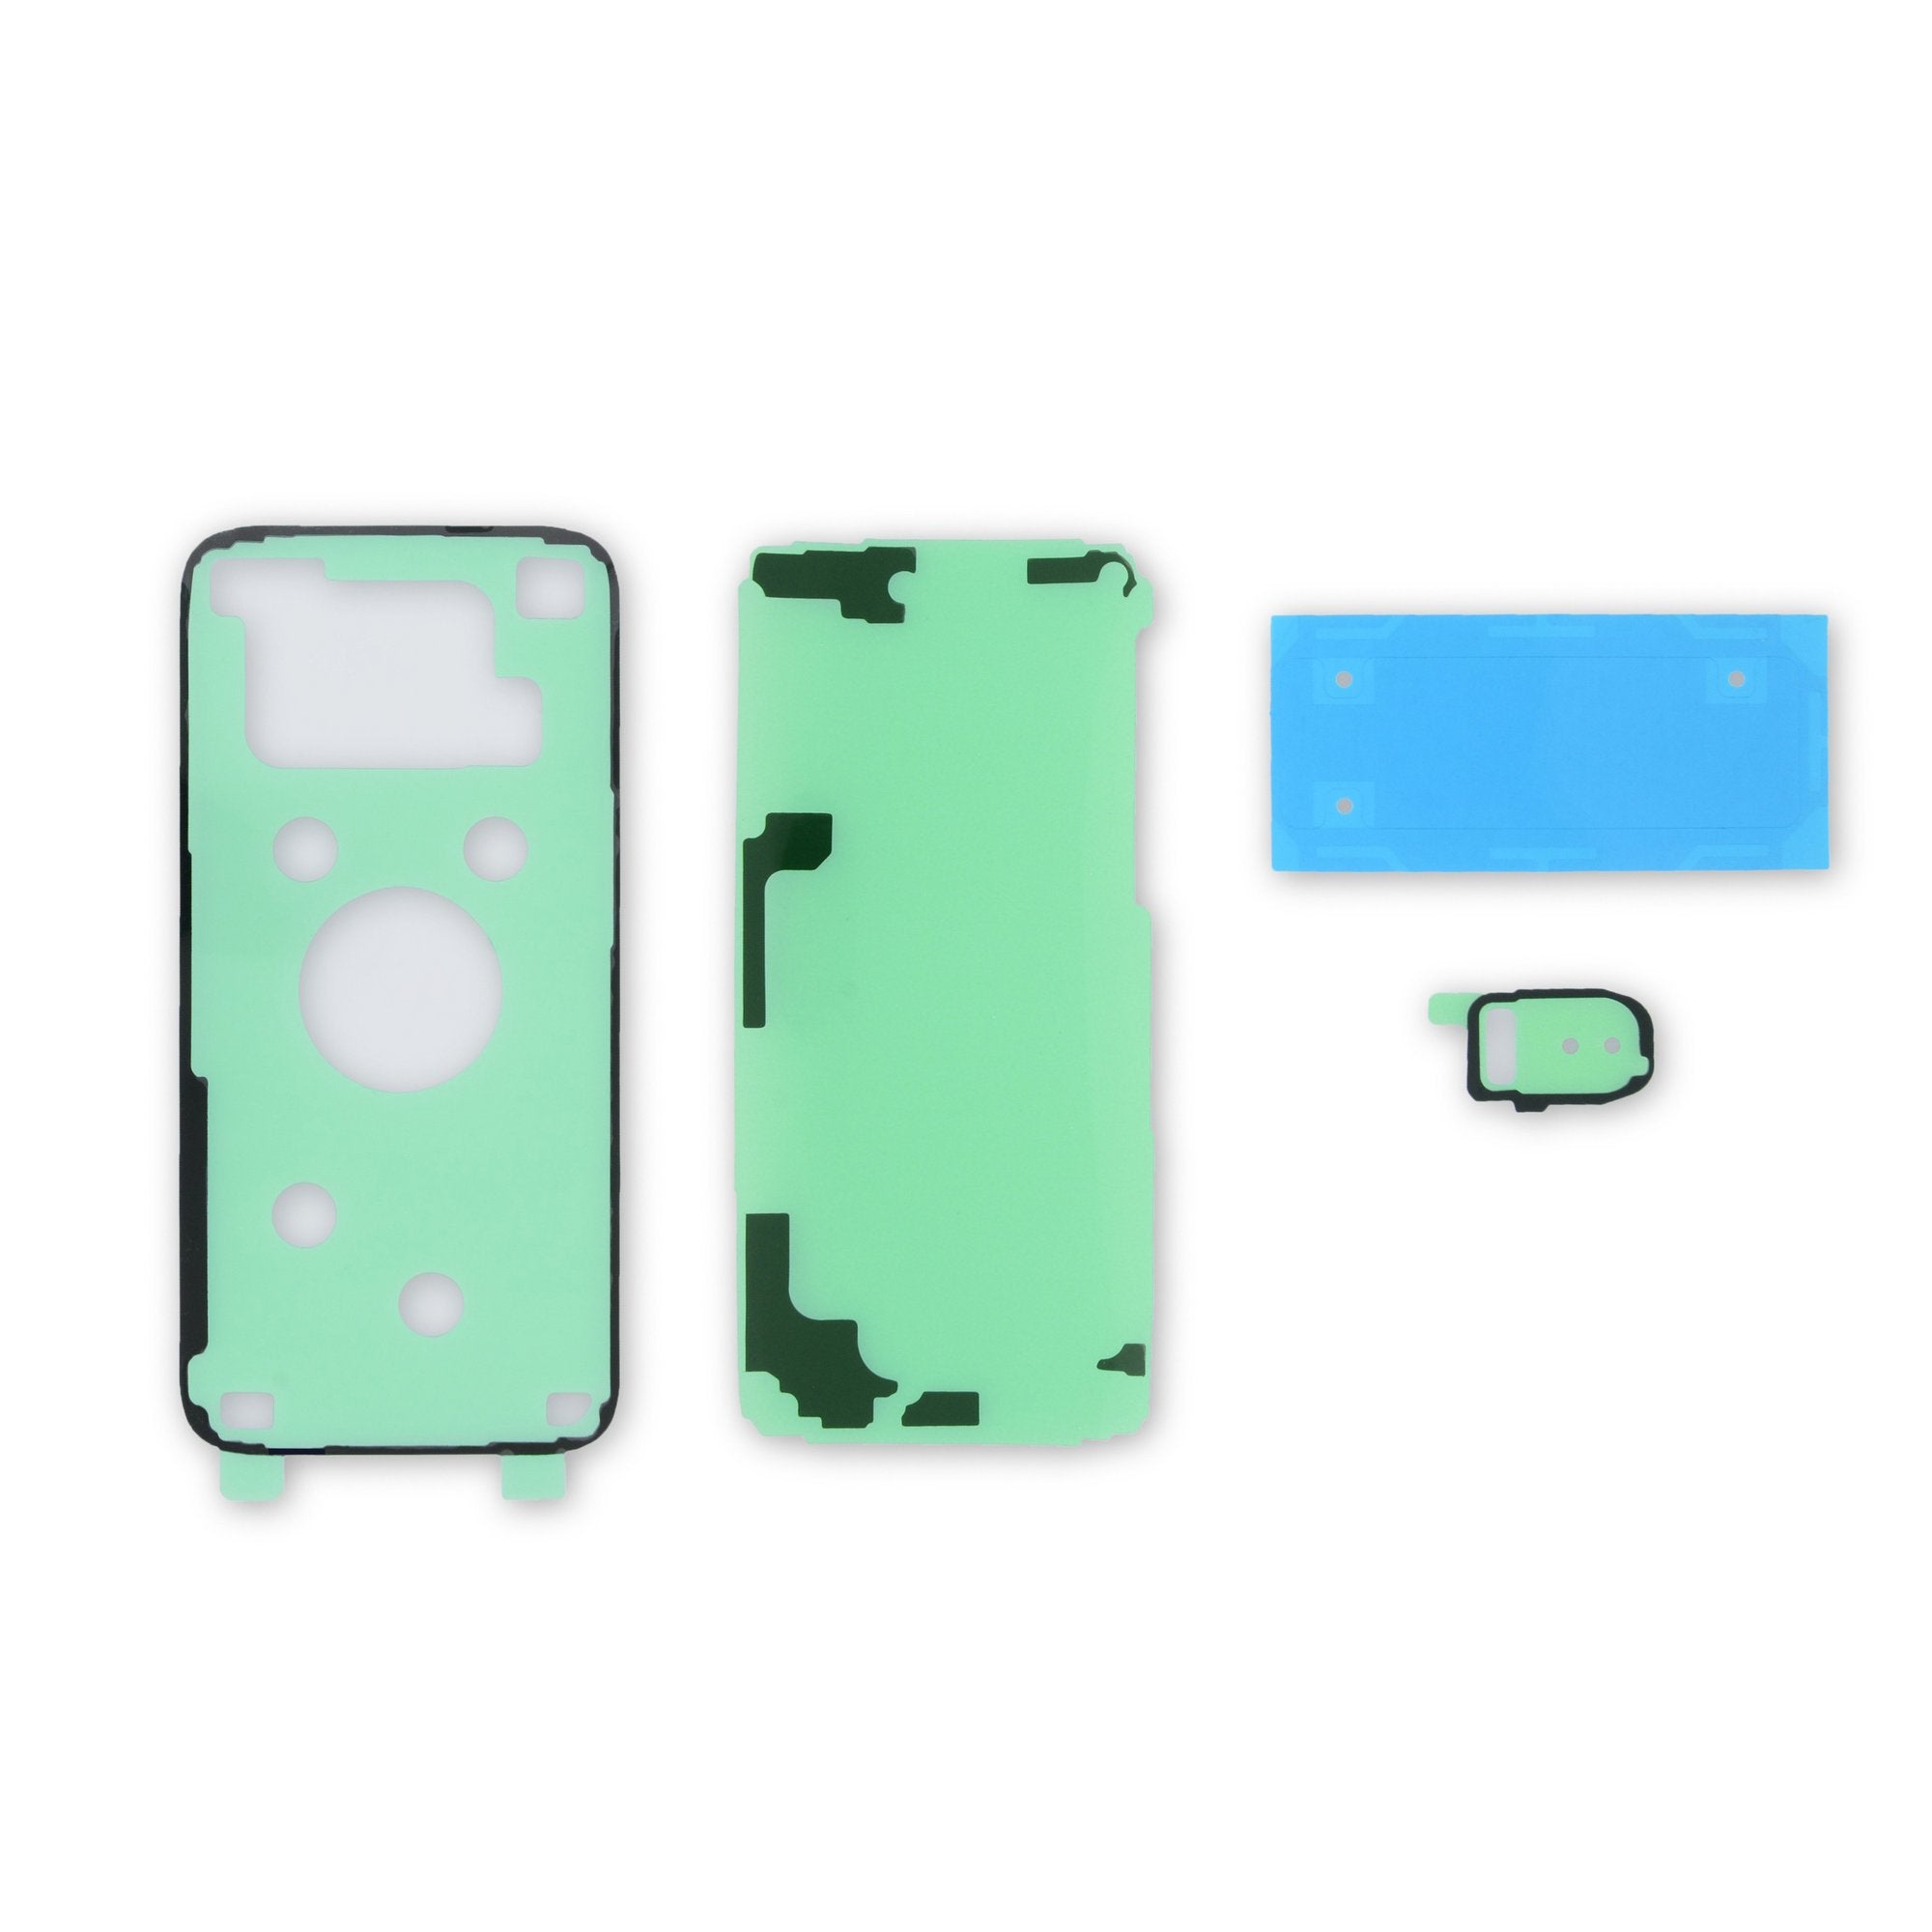 Galaxy S7 Rear Cover Adhesive